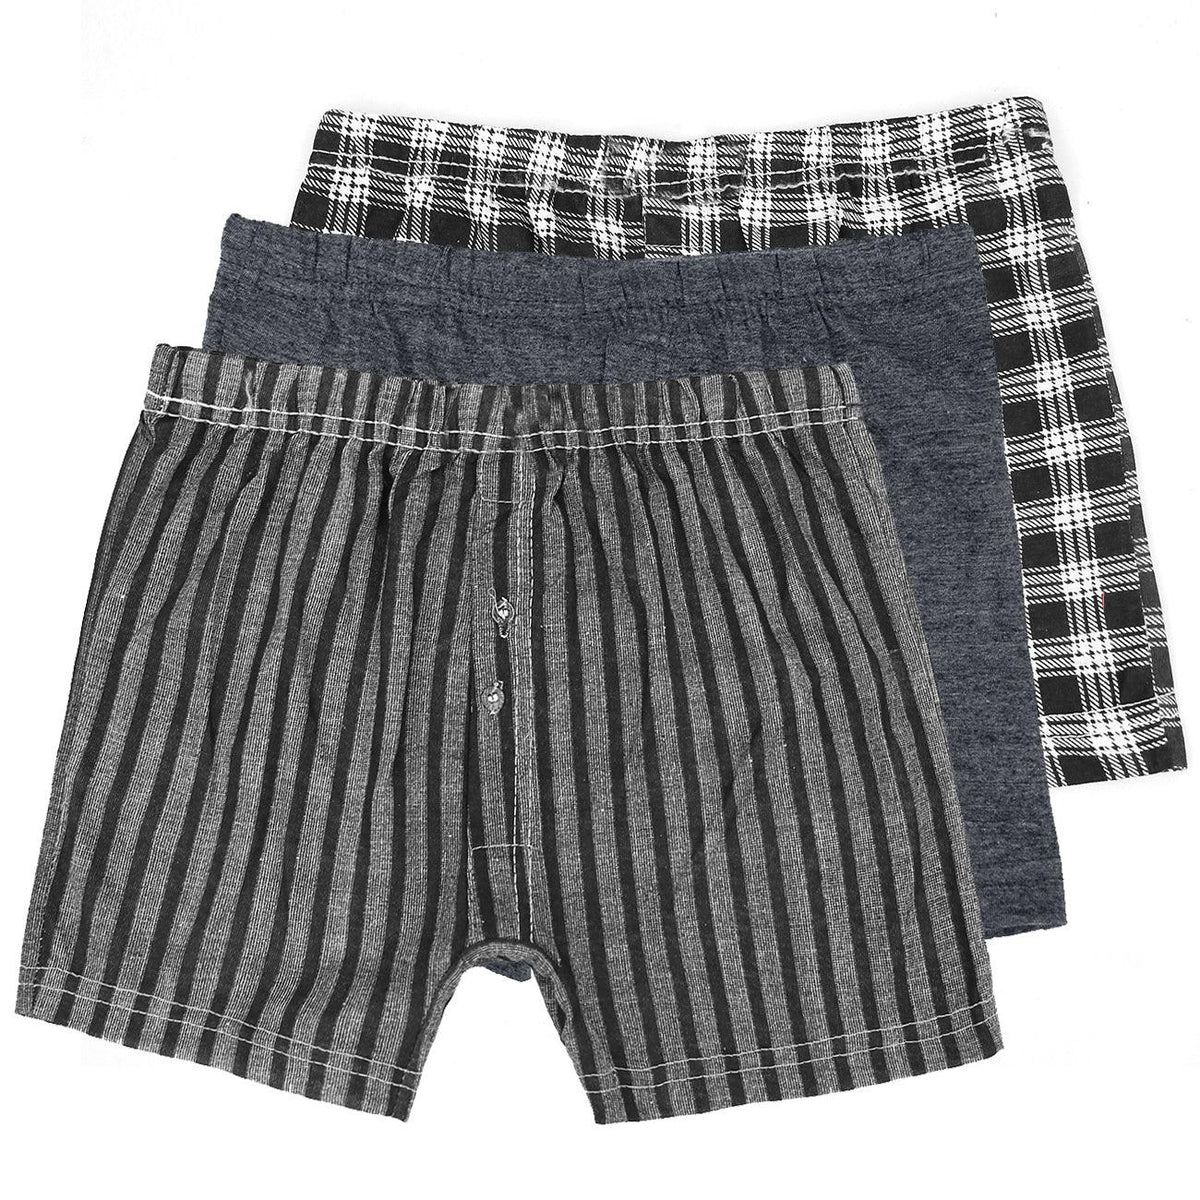 Two Button Fly Pack Of 3 Boxer Shorts For Men (CA-11696) - Brands River